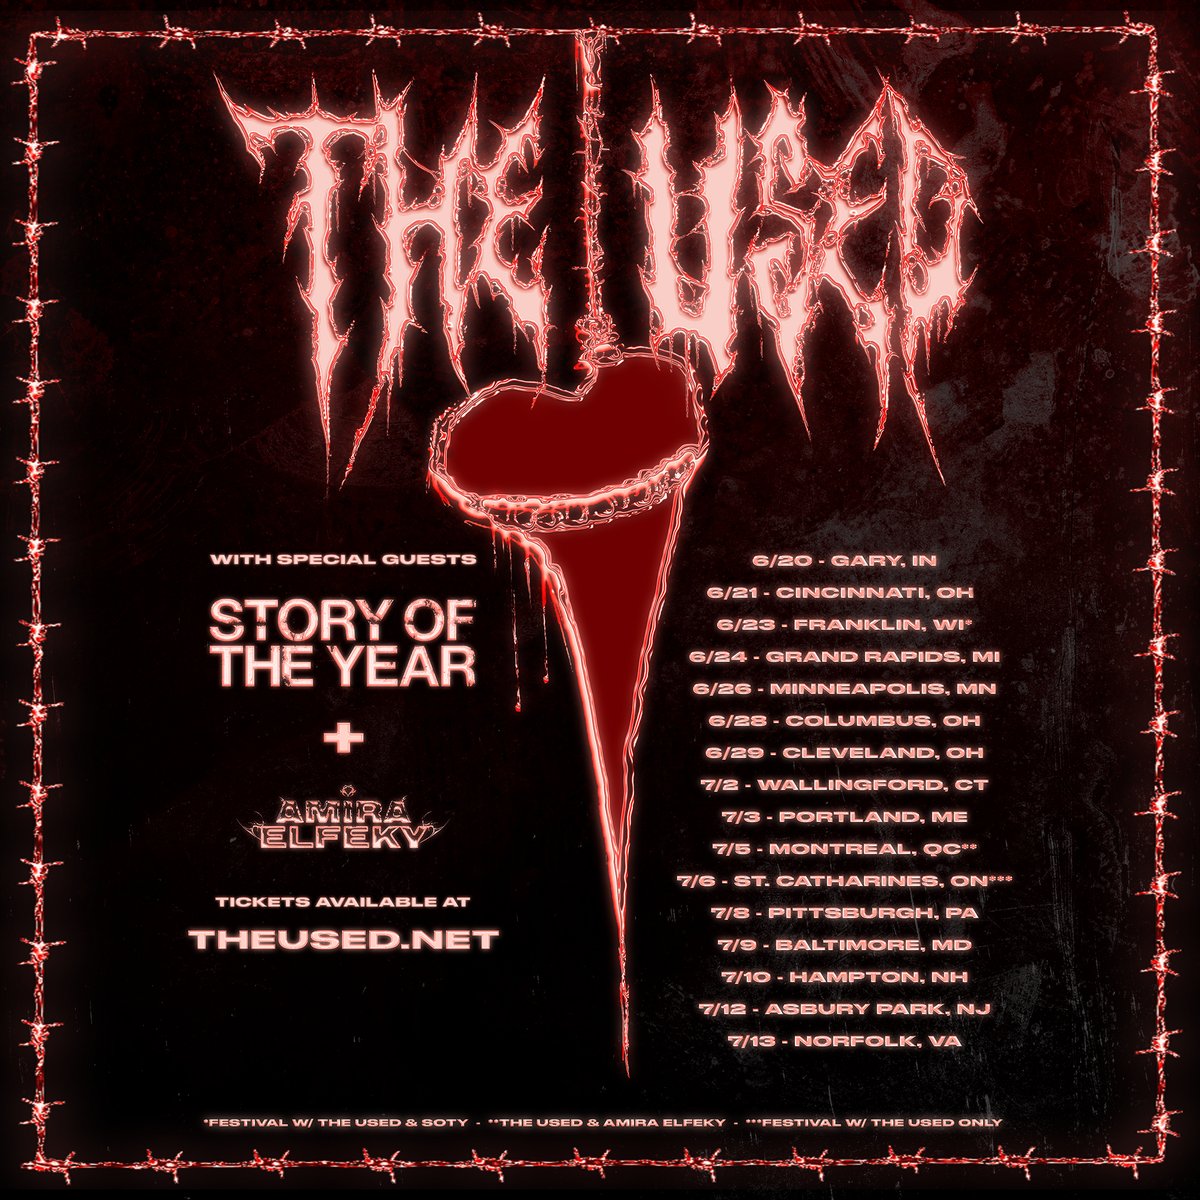 It's the summer tour that you've all been waiting for.... THE USED X STORY OF THE YEAR Presale is happening Wed March 20th @ 10 AM local time – Thurs March 21st @ 10 PM local time. Tickets go on Sale Friday, March 22nd @ 10 AM local time.